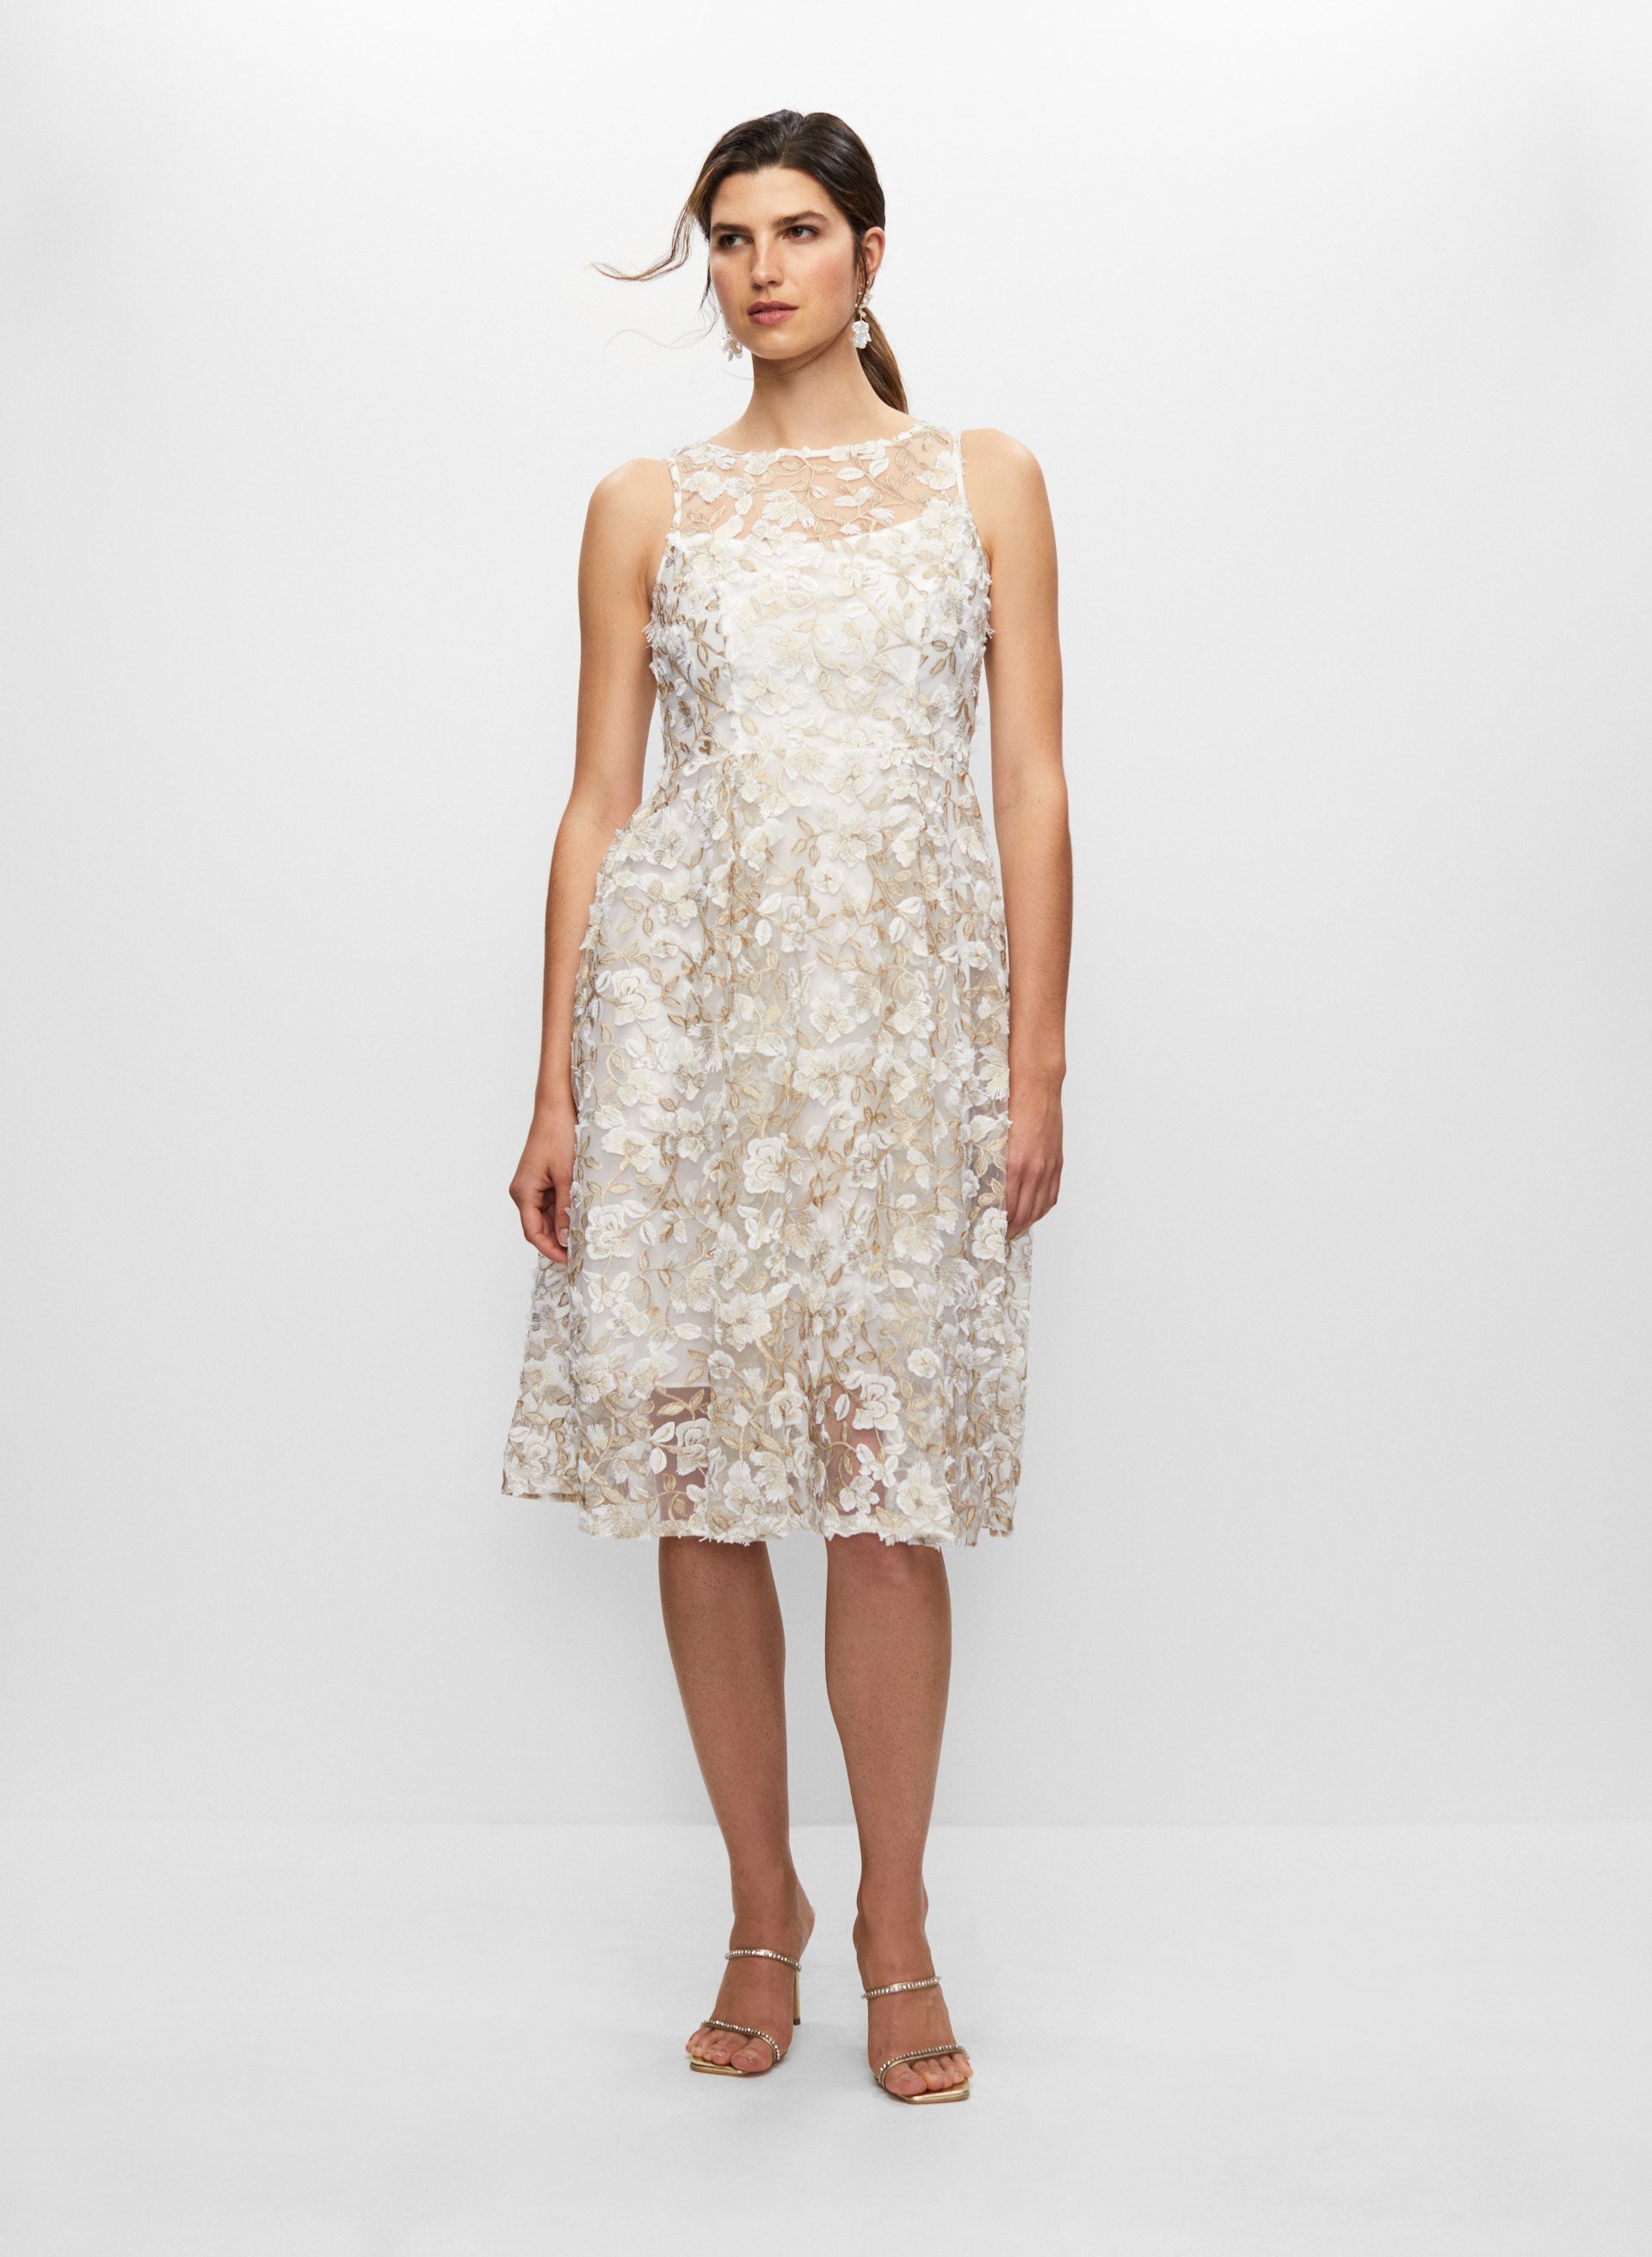 Adrianna Papell - Floral Lace Dress